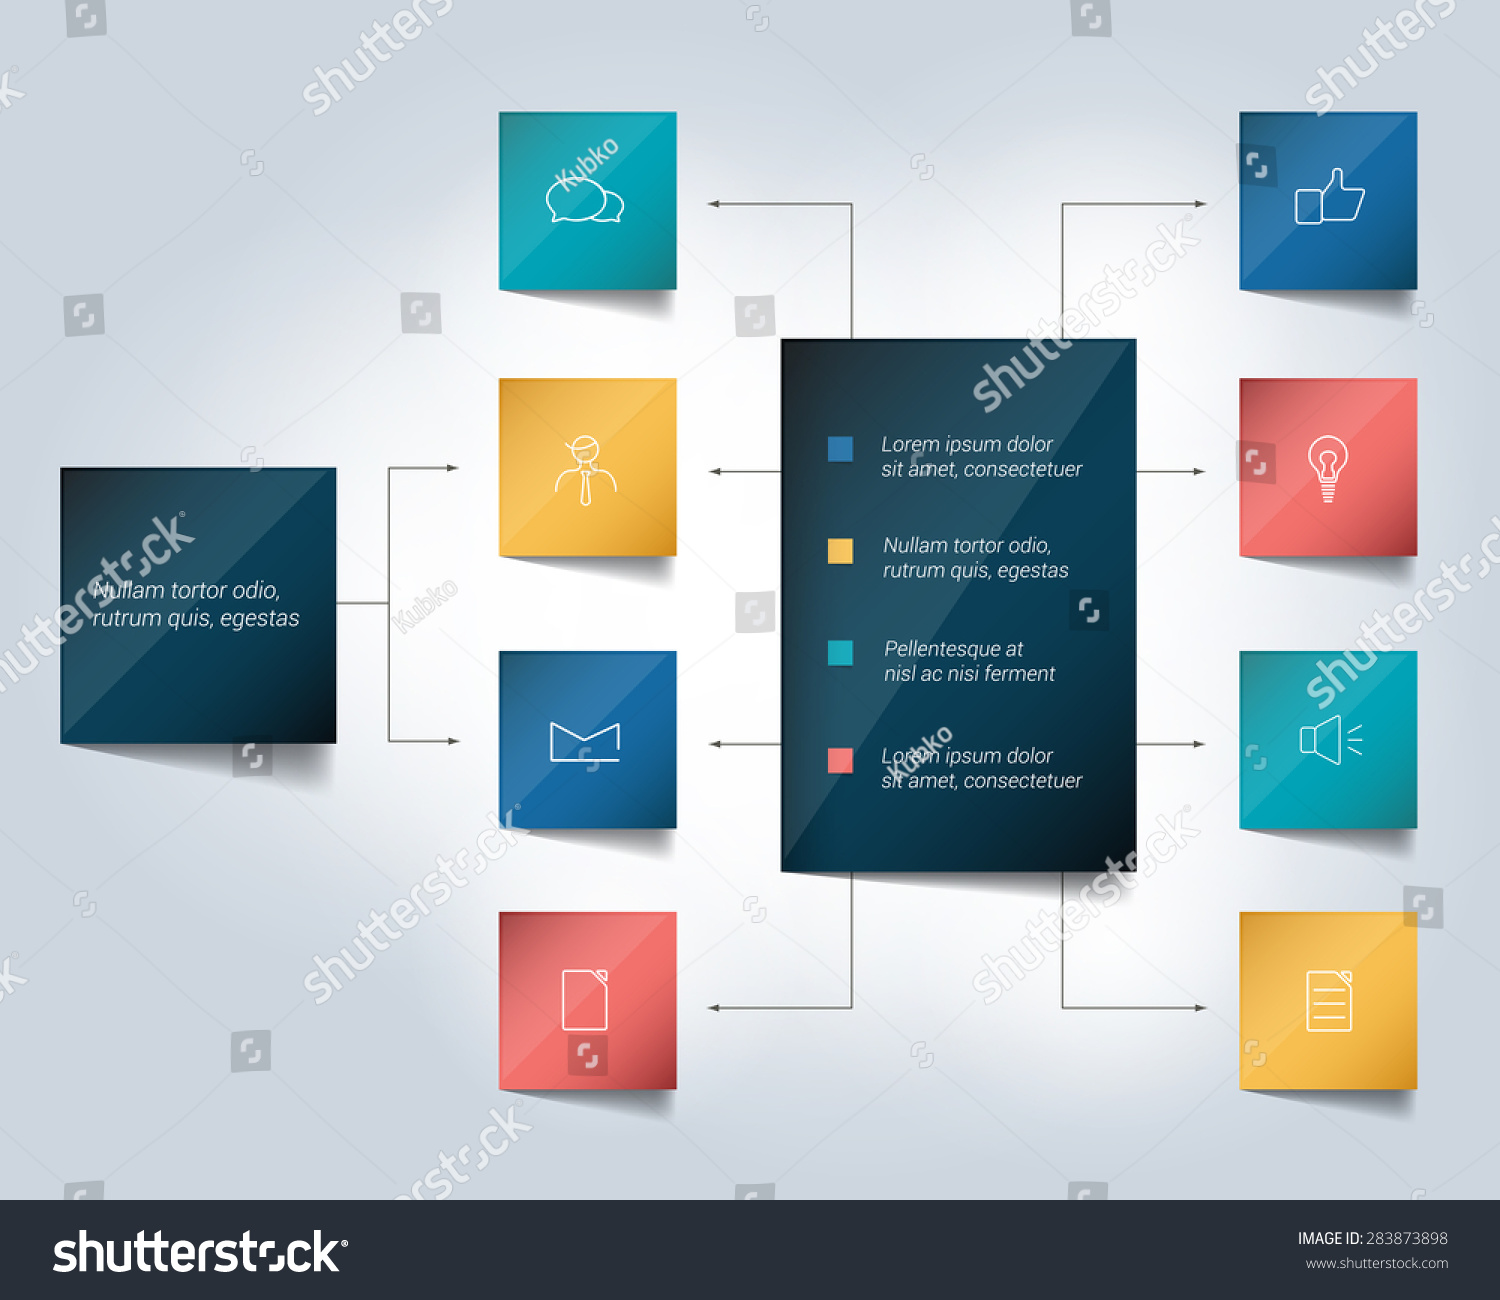 Infographics Flowchart Colored Shadows Scheme Stock Vector Royalty Free 283873898 Shutterstock 7484